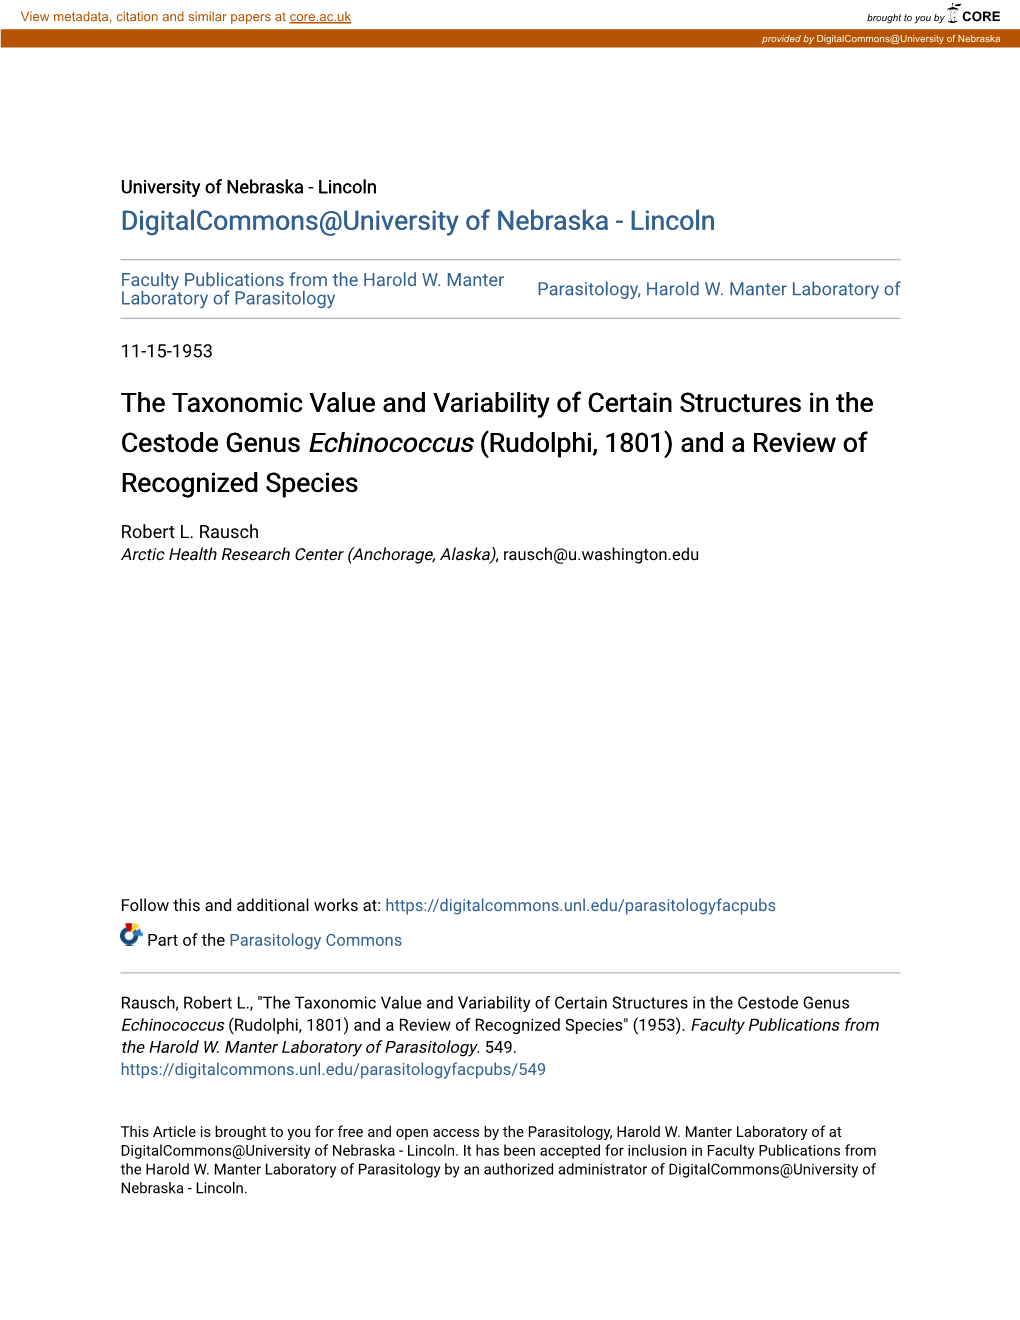 The Taxonomic Value and Variability of Certain Structures in the Cestode Genus Echinococcus (Rudolphi, 1801) and a Review of Recognized Species